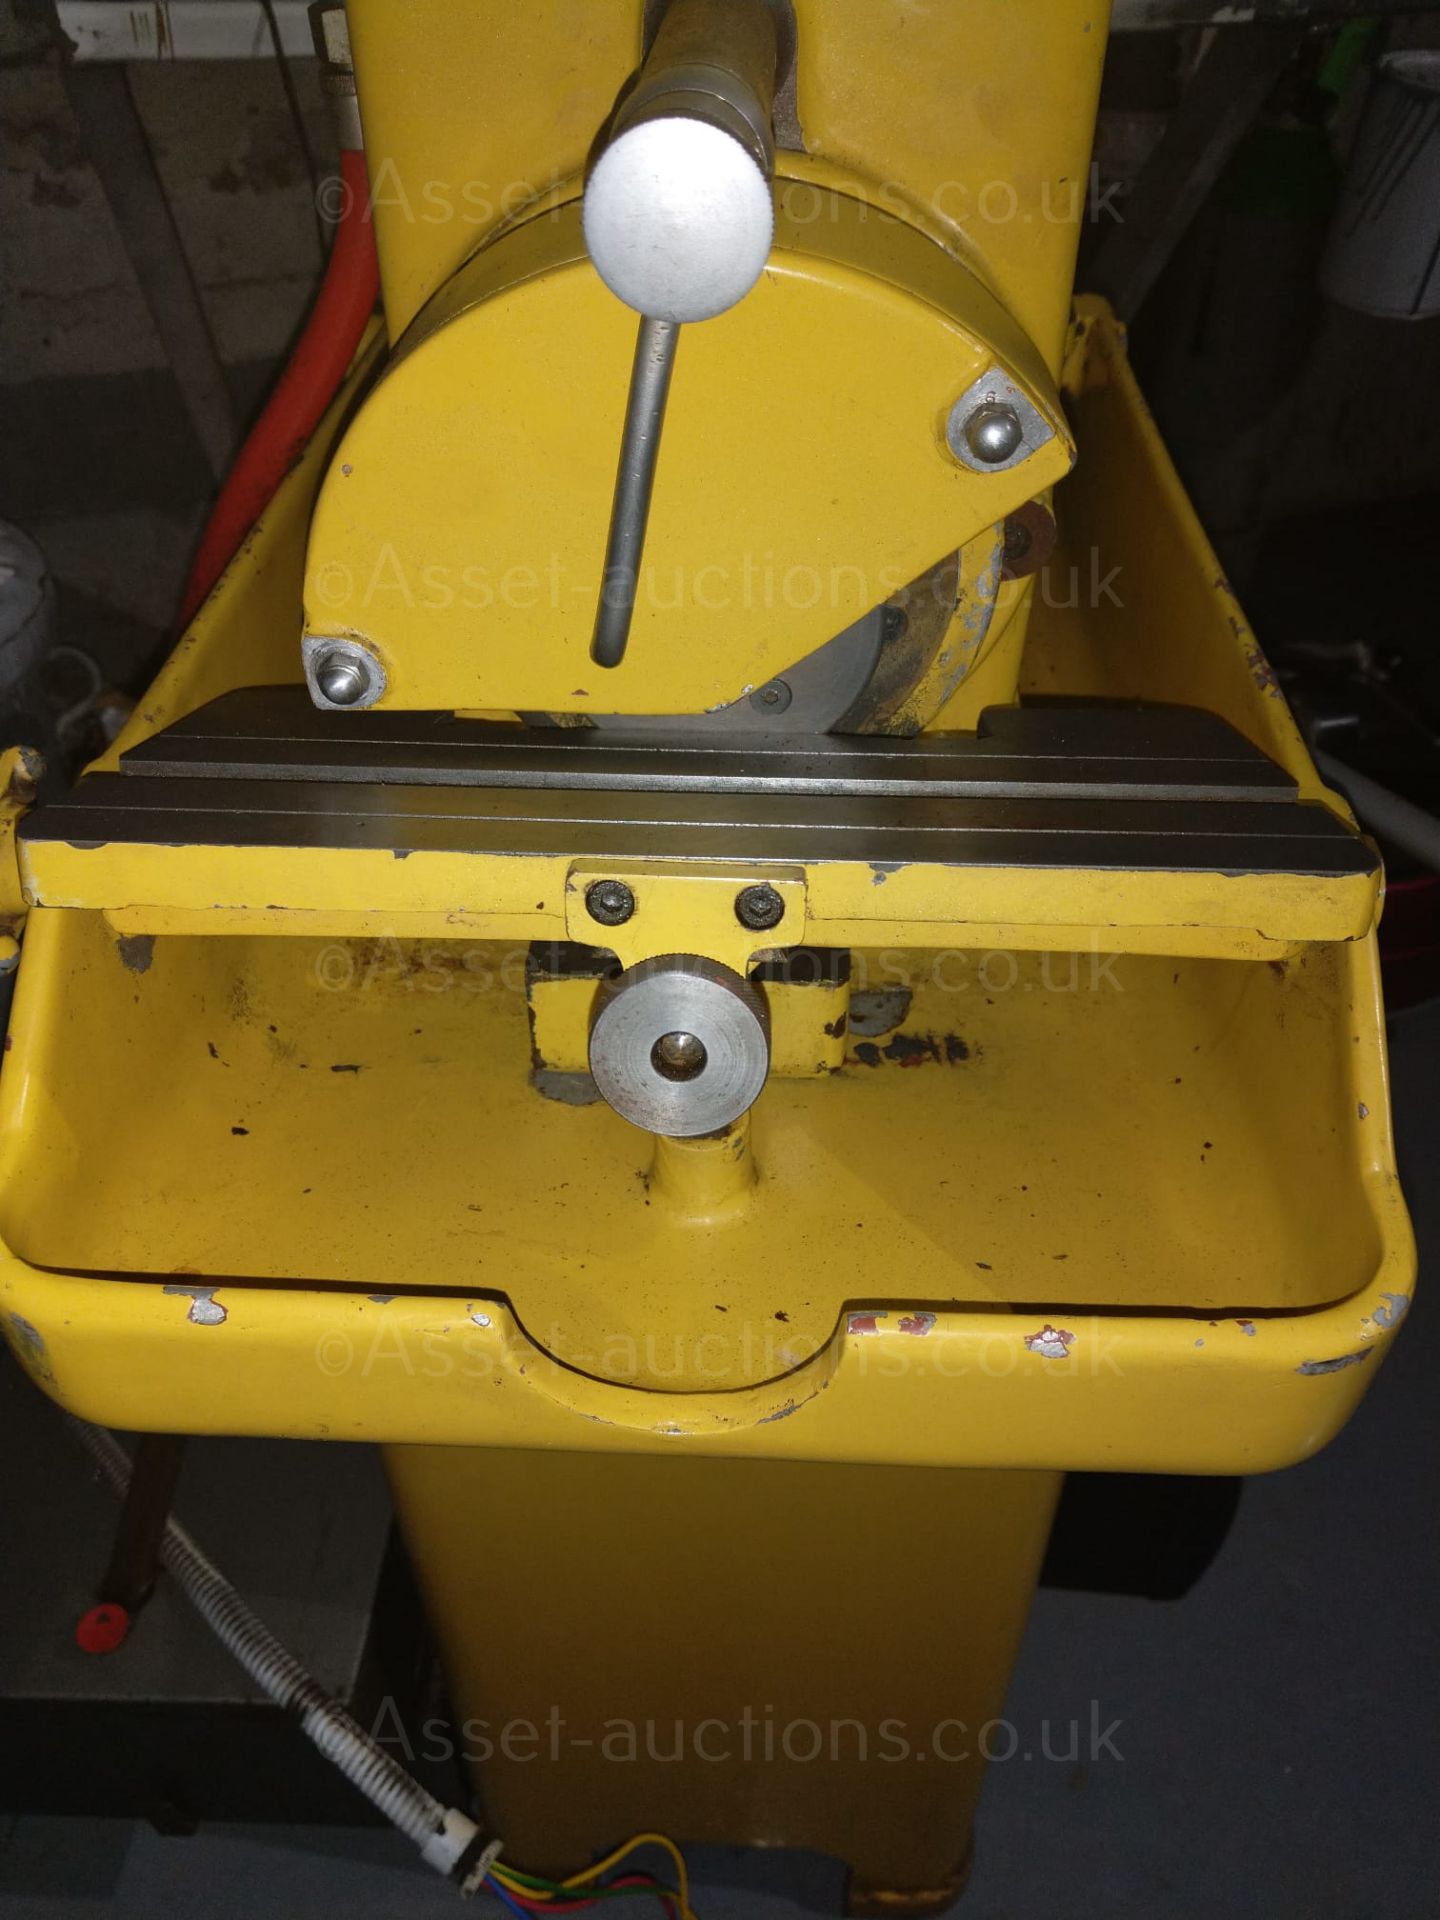 ABWOOD TOOL GRINDER LAPPING MACHINE, DOUBLE HEADED, COOLANT TANK, IN GOOD WORKIN GORDER *NO VAT* - Image 6 of 6